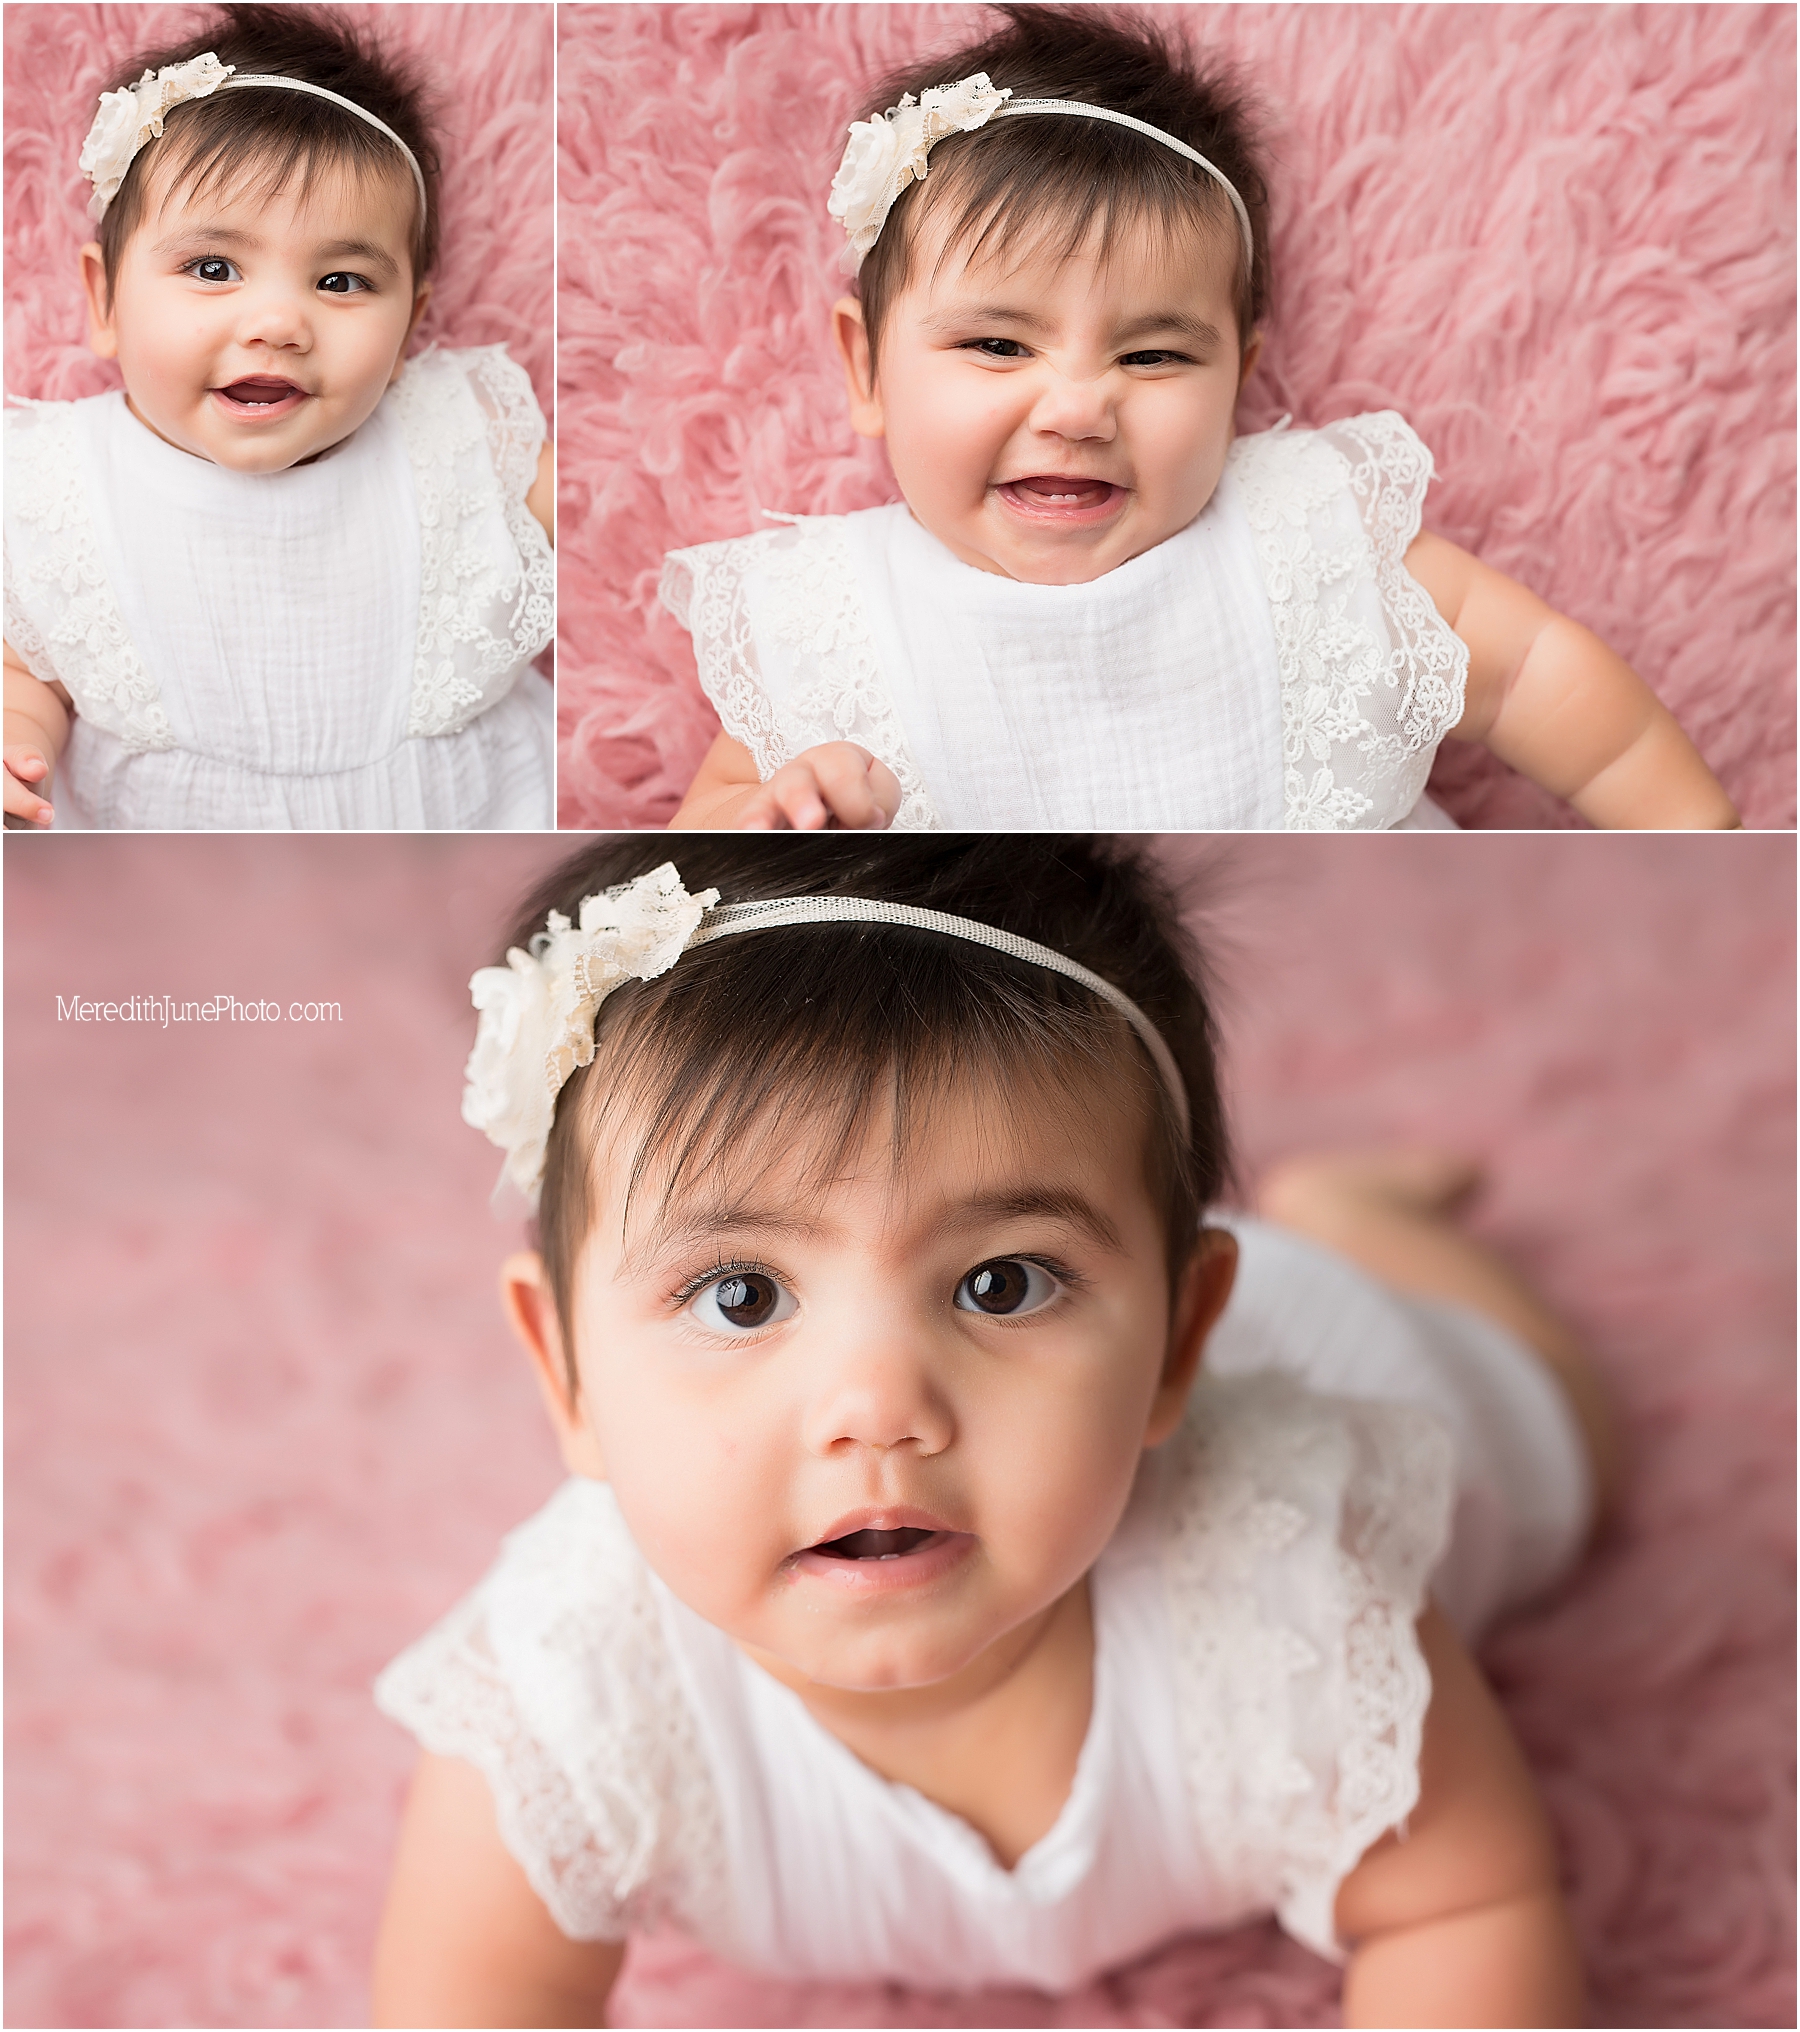 baby girl milestone photo session at Meredith June Photography 